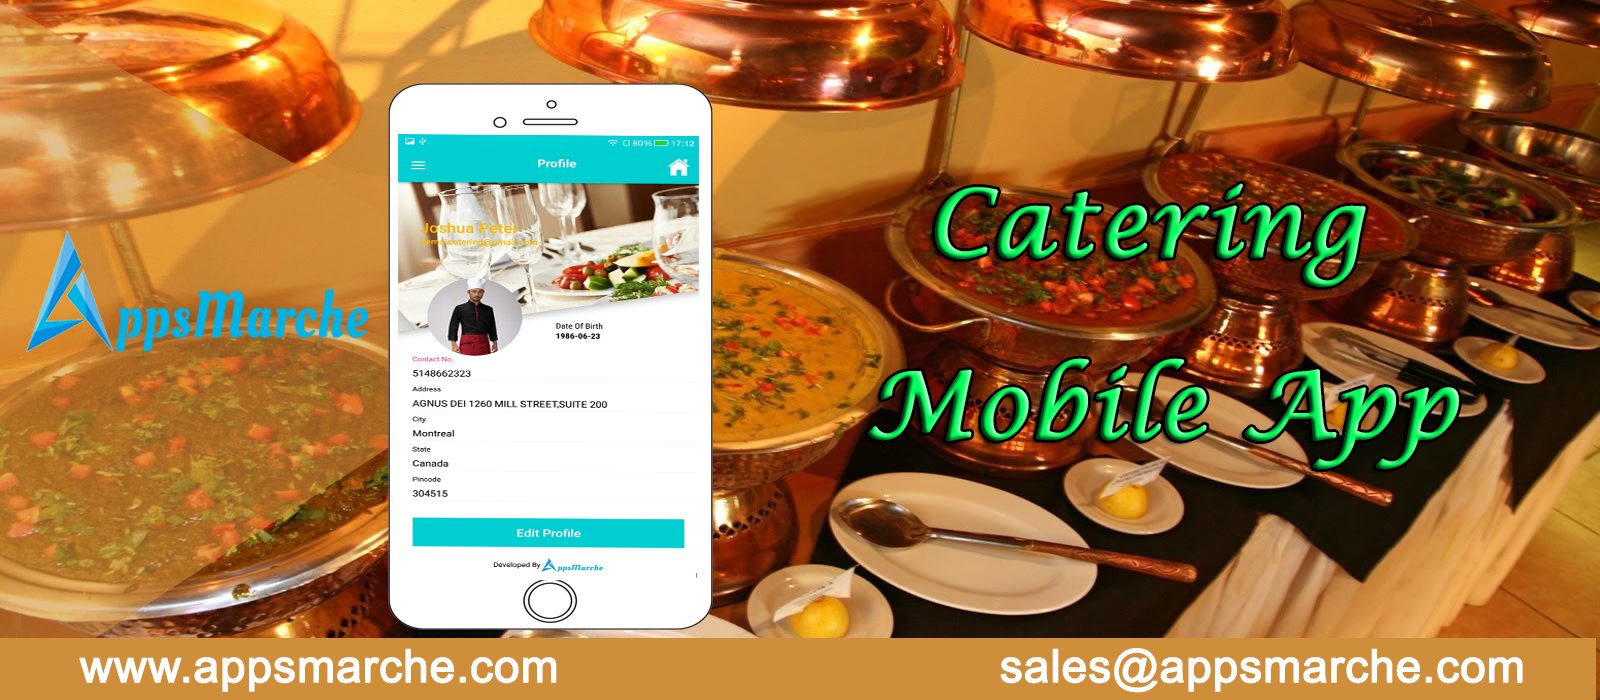 deliver better catering services with catering mobile app, online caterers mobile app, best catering mobile app, catering services mobile app, top catering, Wedding Catering, mobile app builder, app builder, appsmarket, android Market, appsmarche